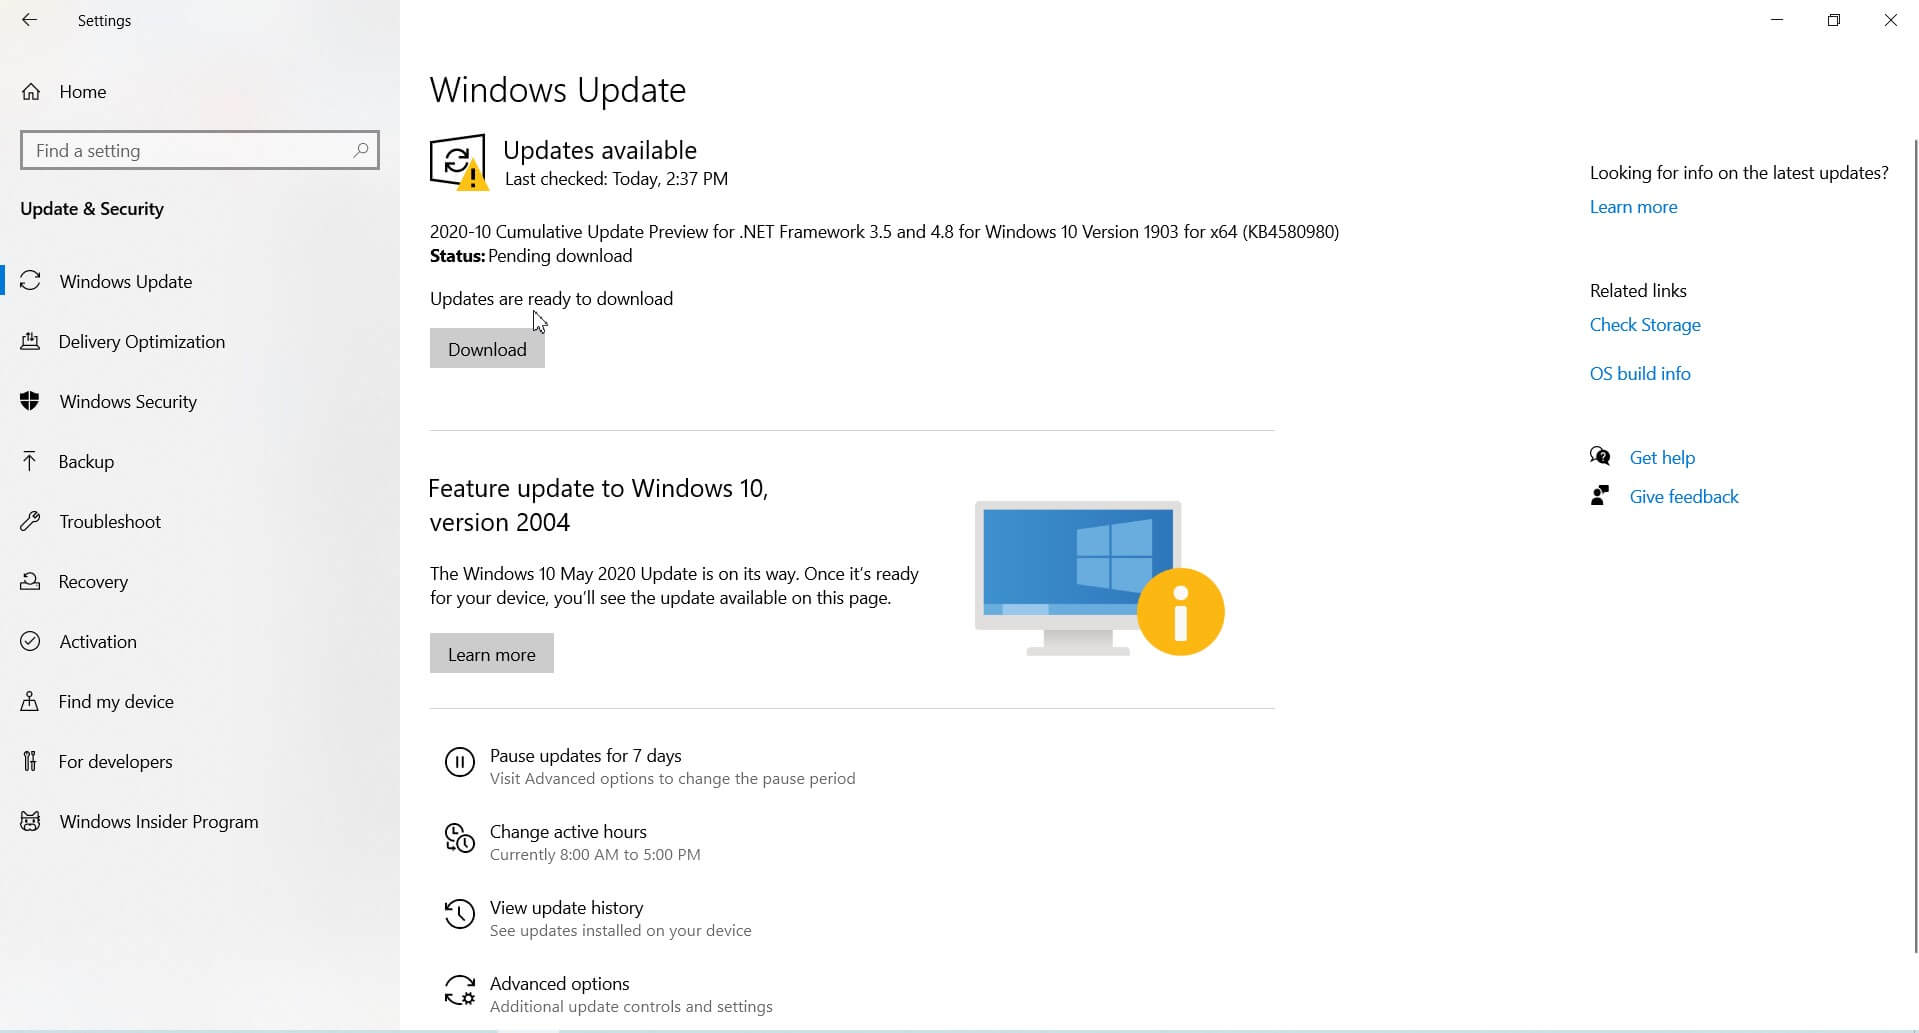 How to turn off automatic updates in Windows 10?